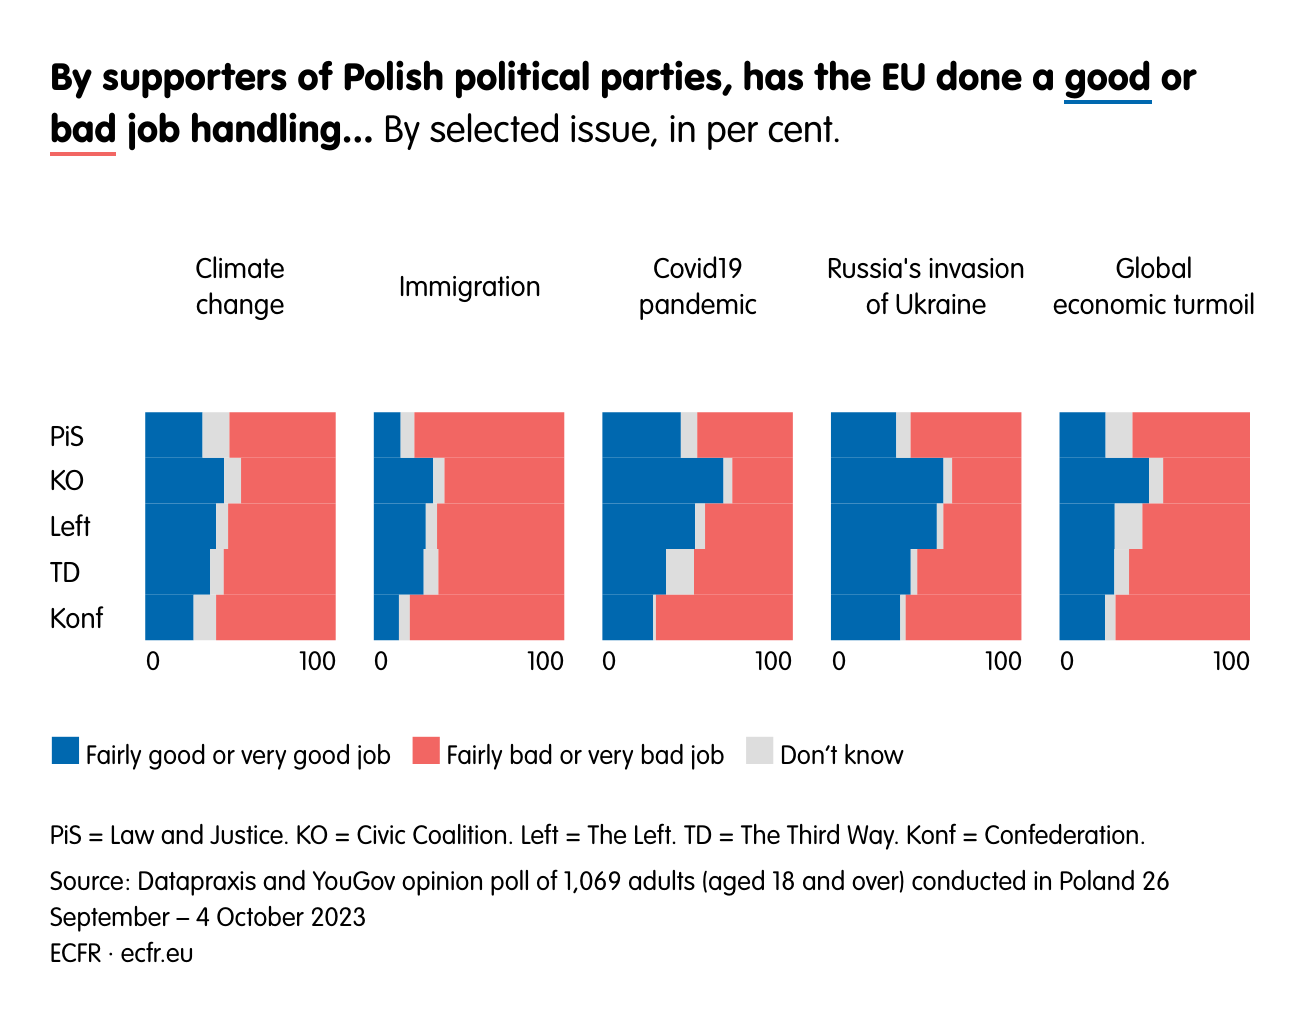 By supporters of Polish political parties, has the EU done a good or bad job handling… 